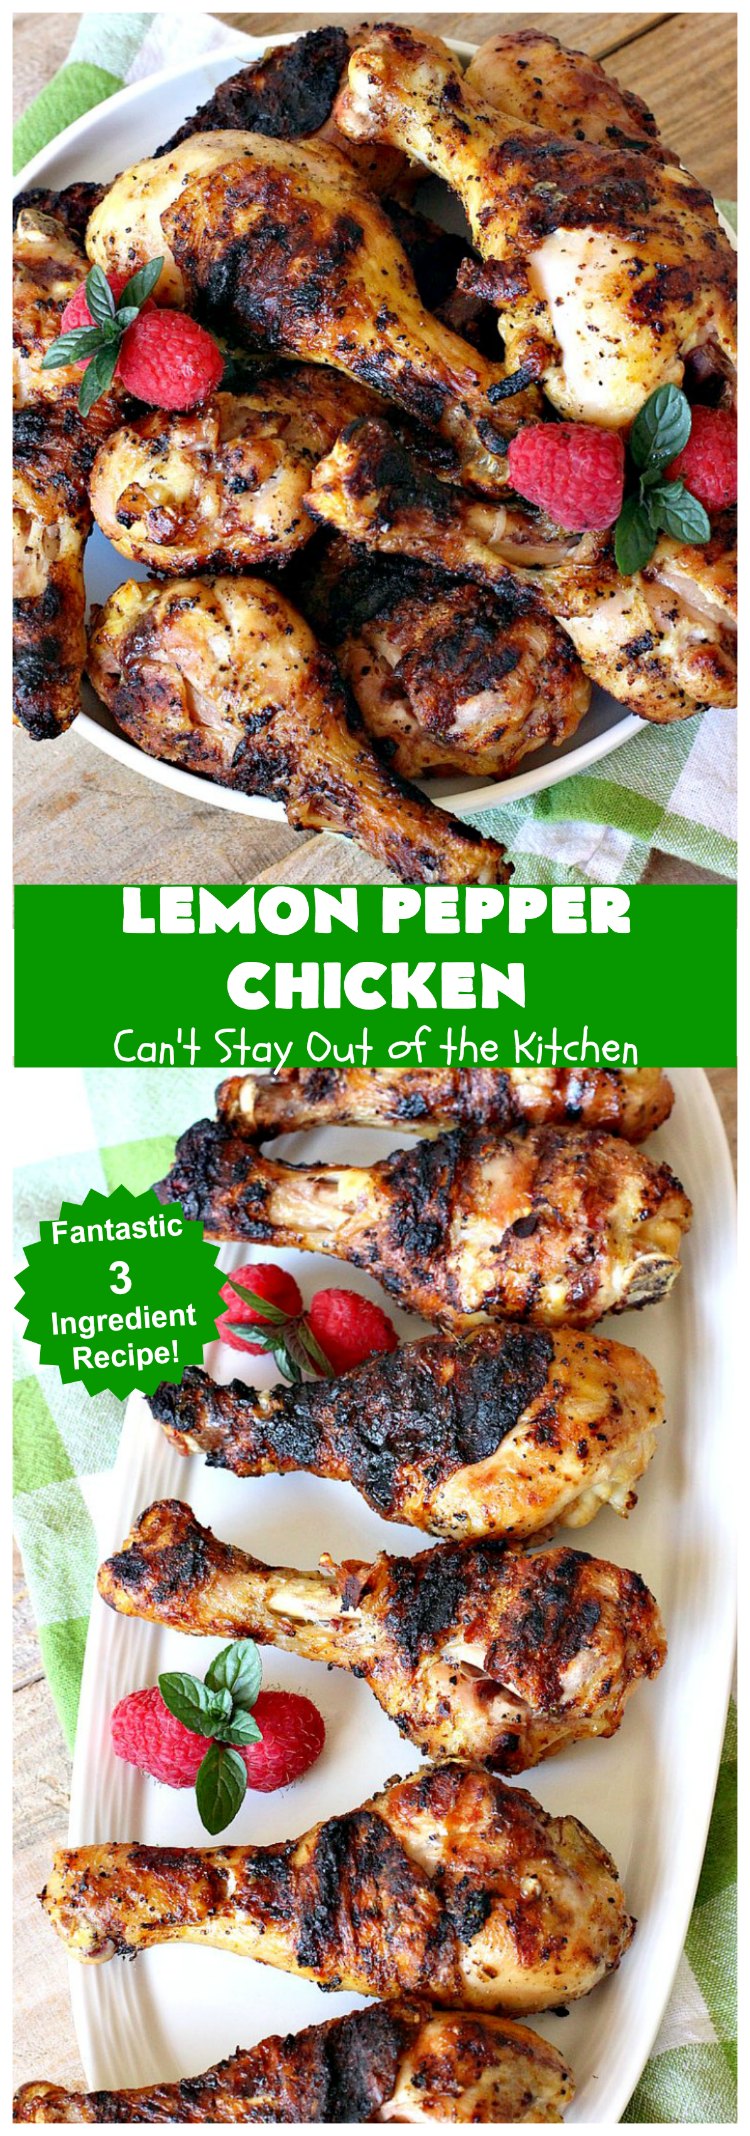 Lemon Pepper Chicken | Can't Stay Out of the Kitchen | fantastic 3 ingredient #GrilledChicken #recipe that's perfect for #tailgating parties or weeknight dinners when you're short on time. #chicken #GlutenFree #LemonPepperChicken